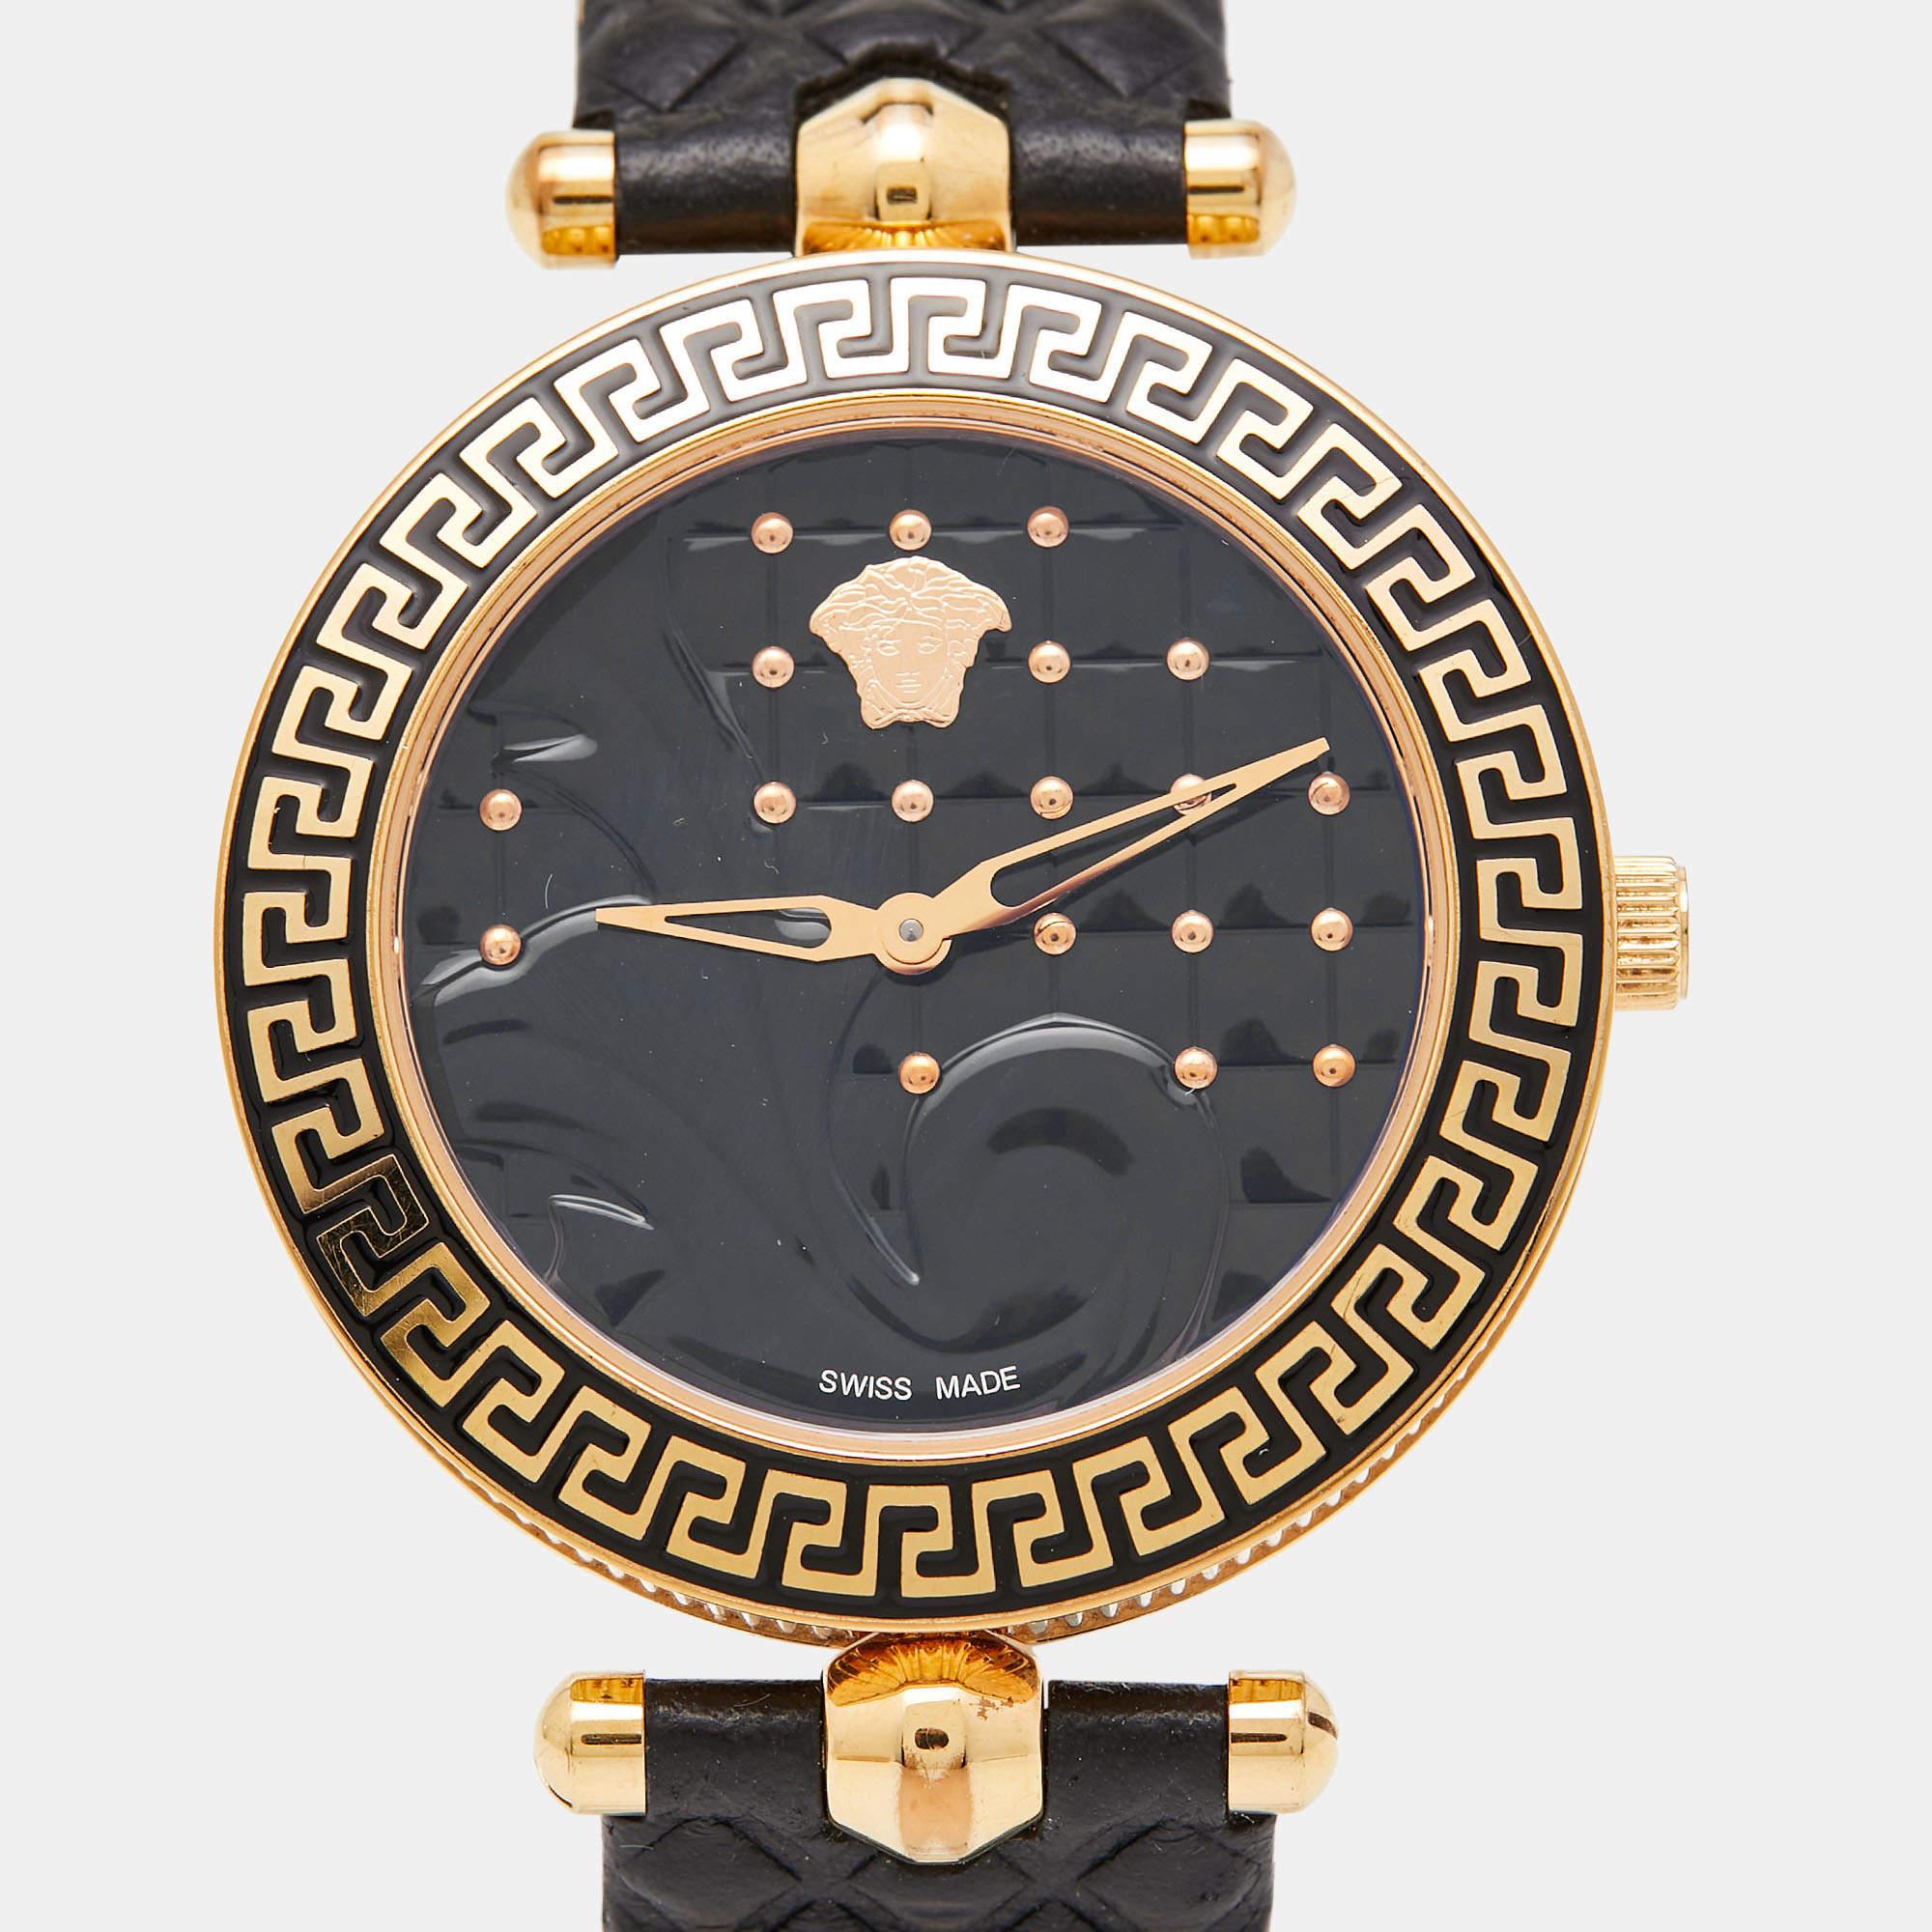 Let this Versace wristwatch accompany you with ease and luxurious style. Beautifully crafted using the best quality materials, this authentic branded watch is built to be a standout accessory for your wrist.

